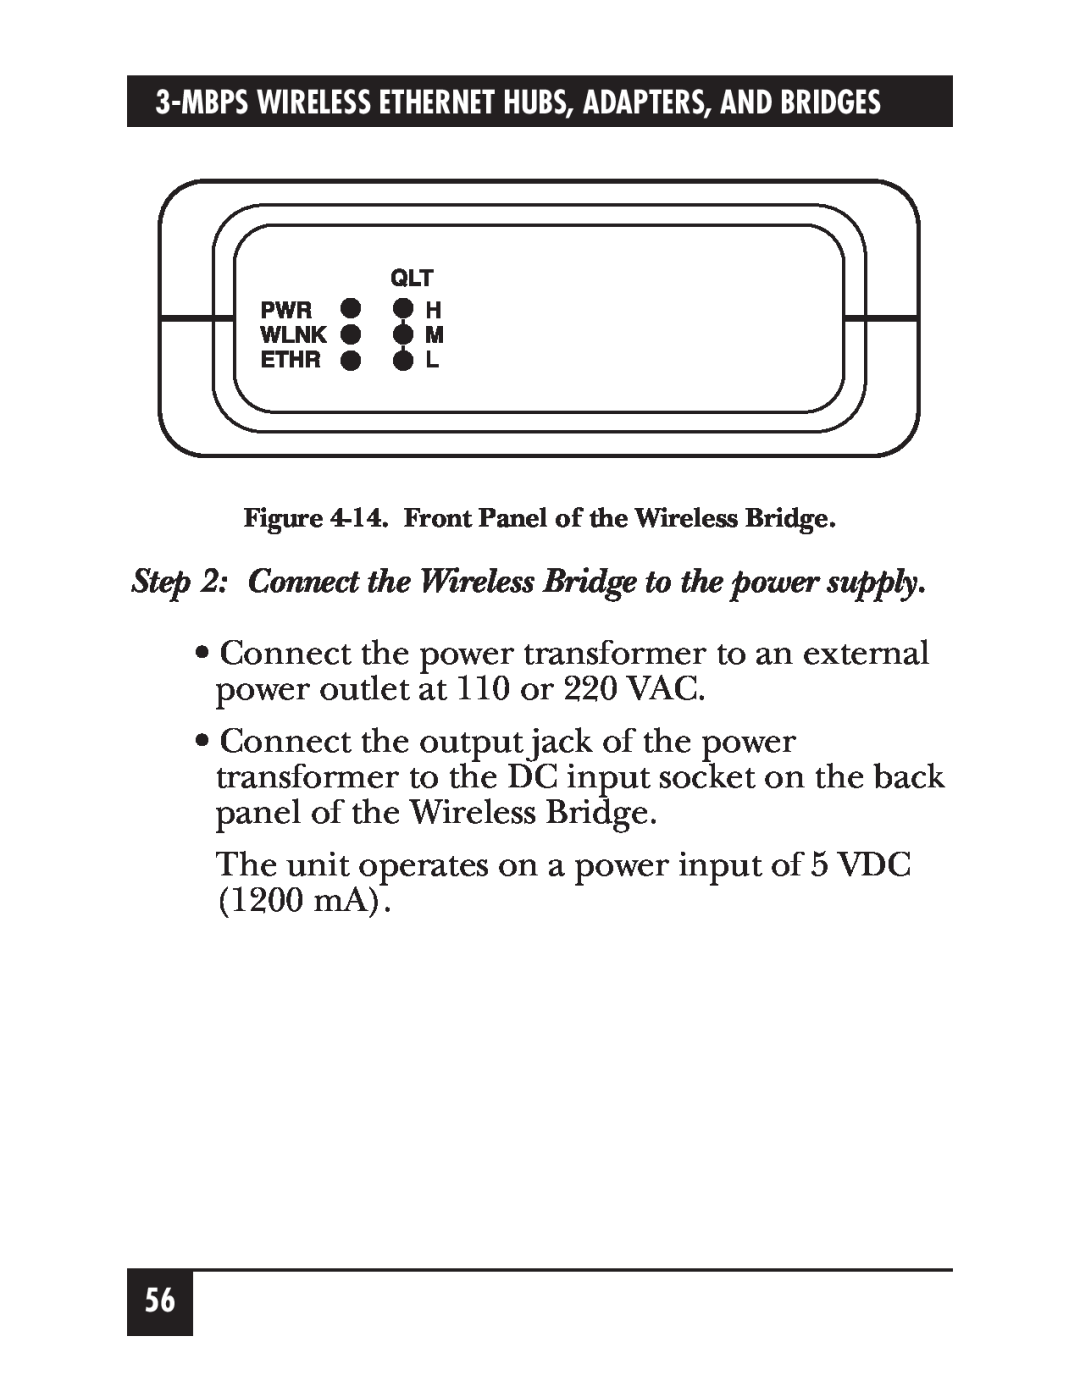 Black Box LW009A, LW012AE manual Connect the Wireless Bridge to the power supply, 14. Front Panel of the Wireless Bridge 